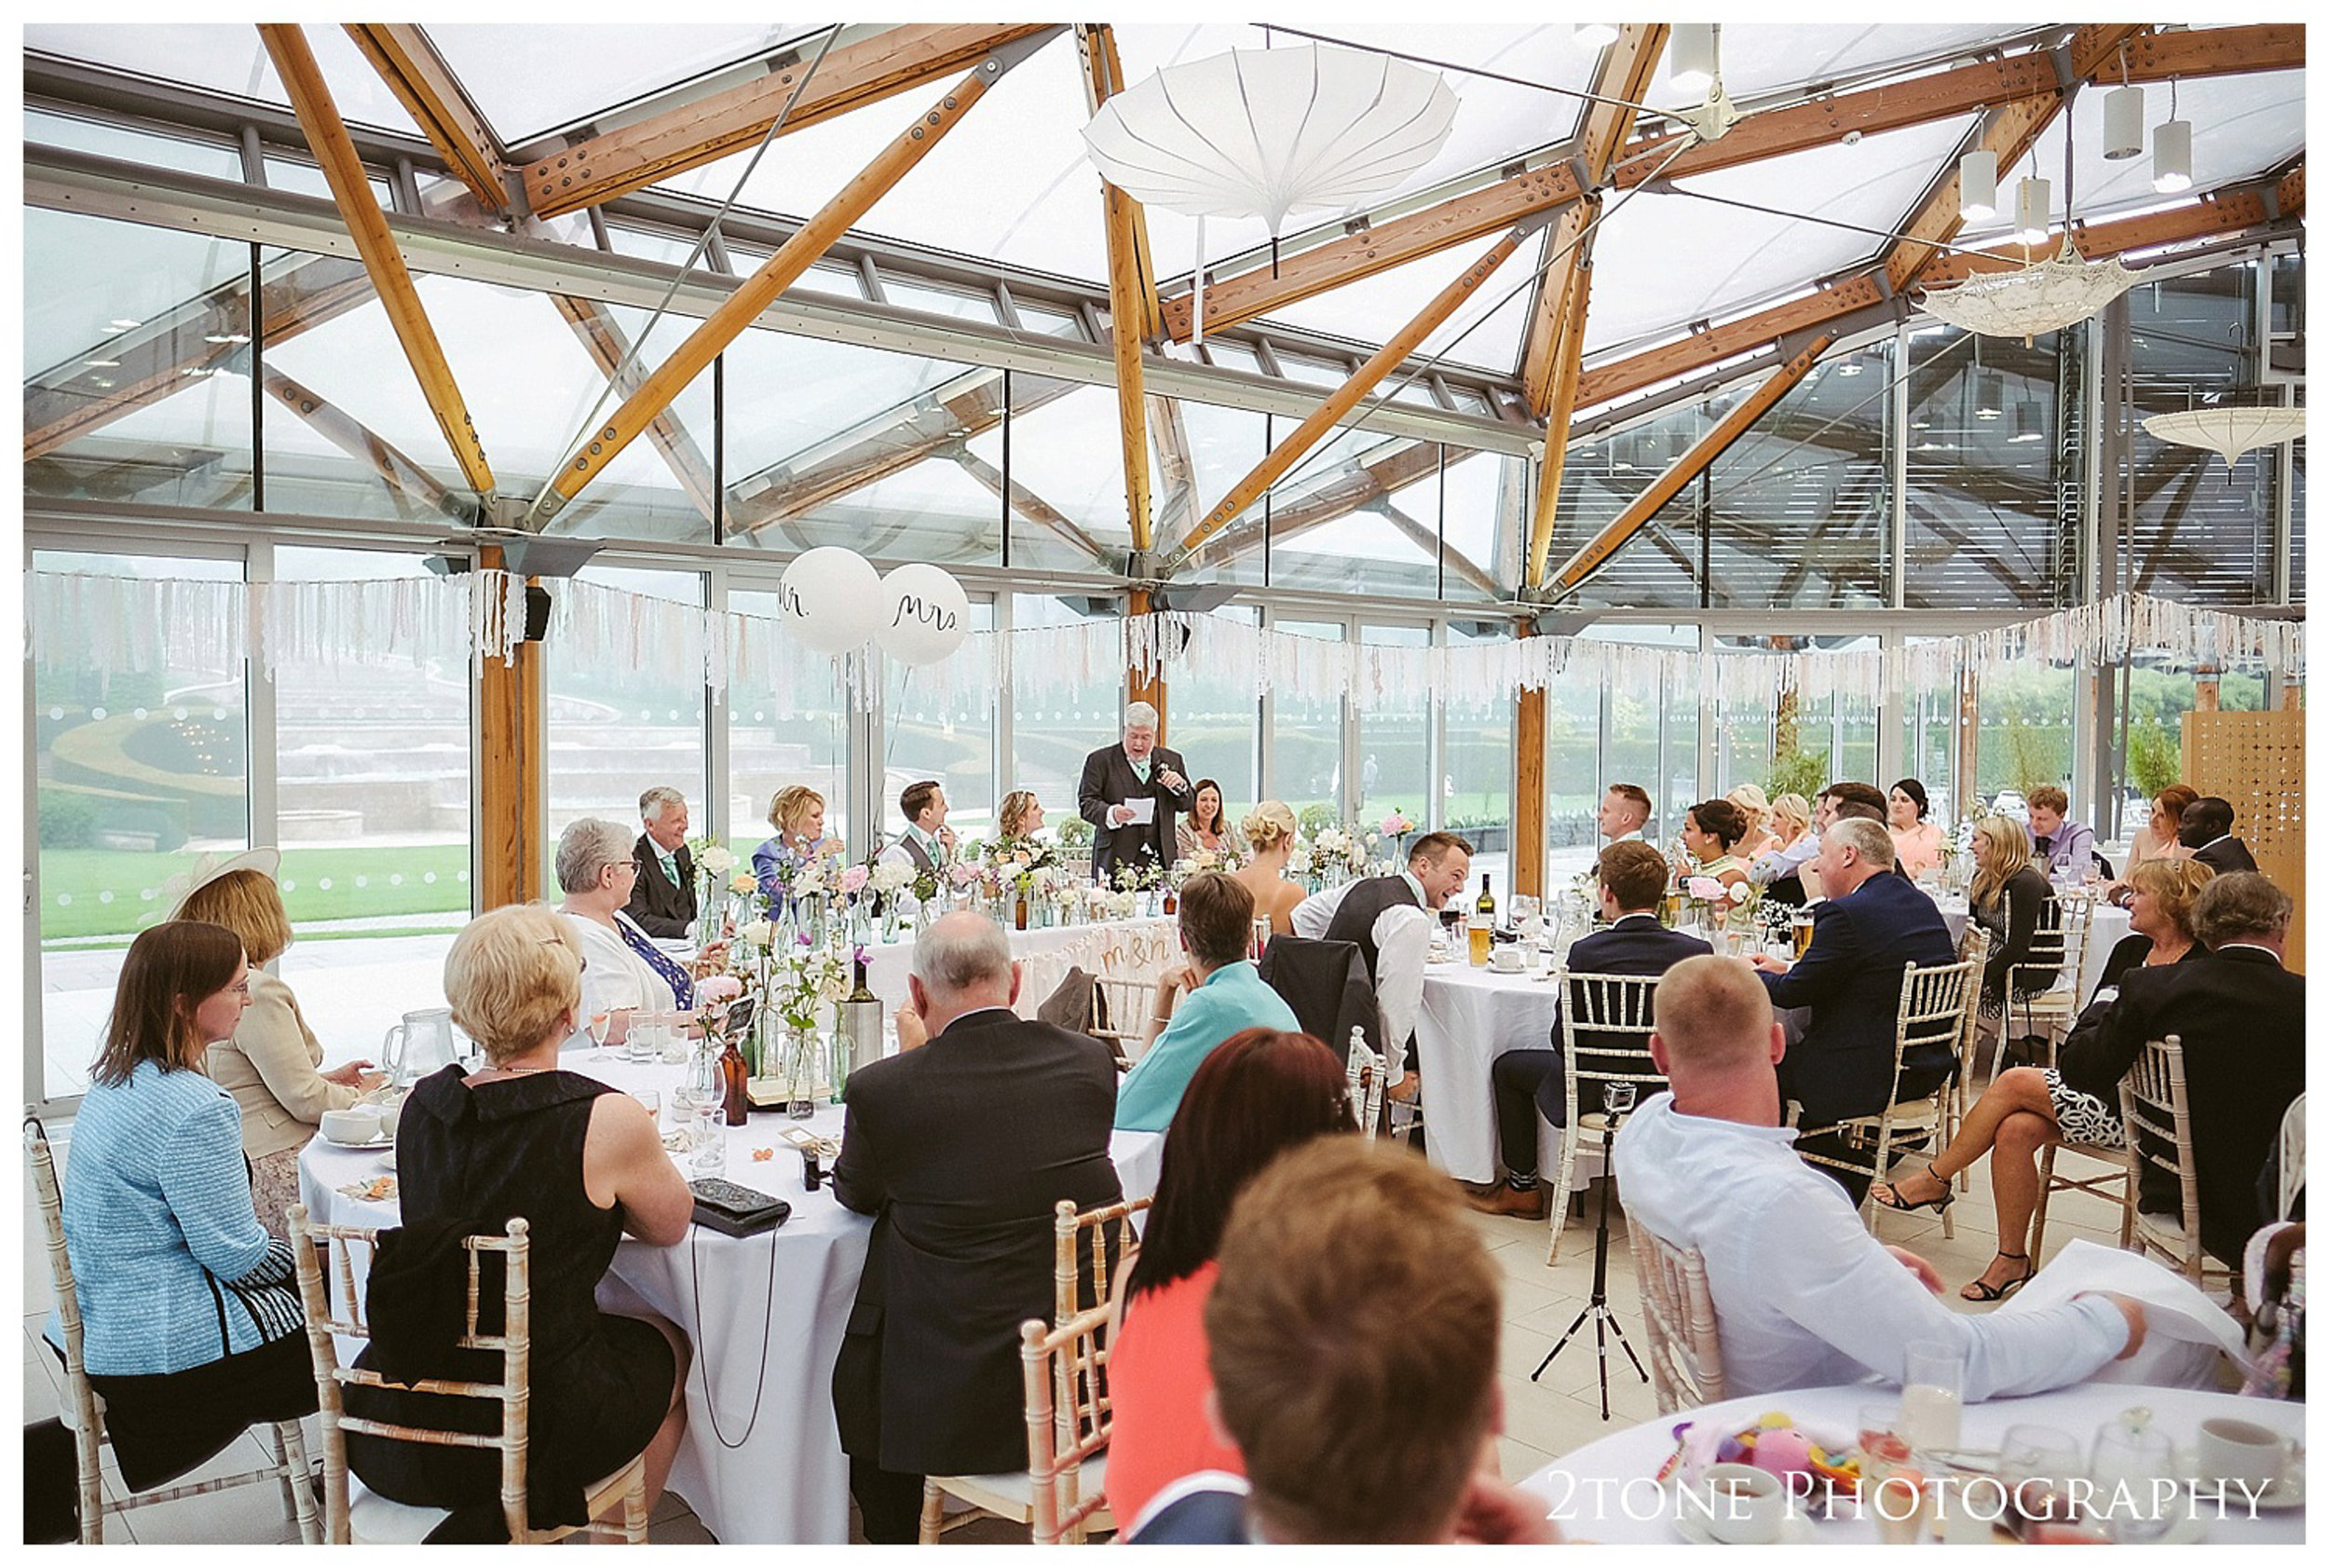 Wedding photography at the Alnwick Garden by www.2tonephotograph